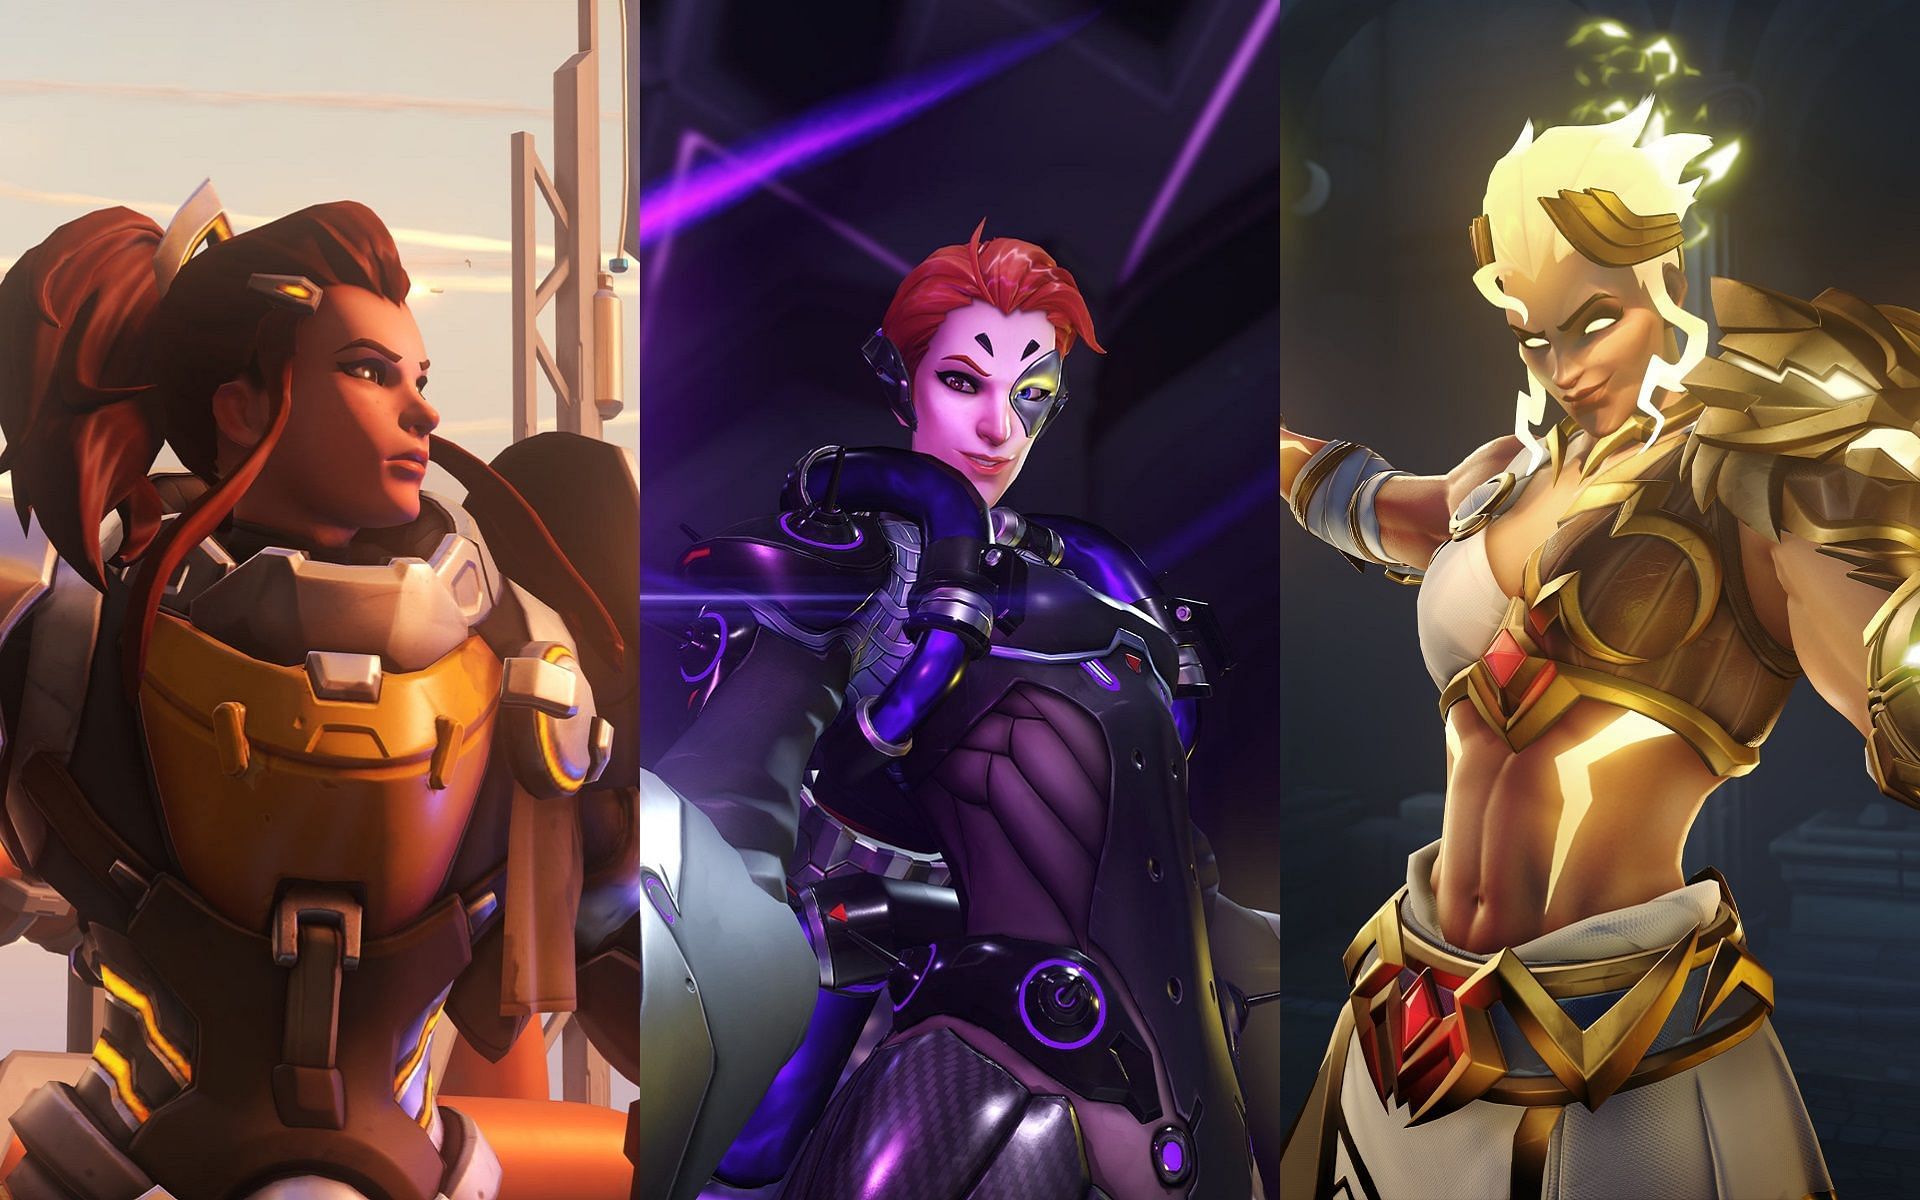 Junker Queen, Moira, Brigitte, and more received changes in Overwatch 2 Season 2 Mid-Season update (Images via Blizzard Entertainment)